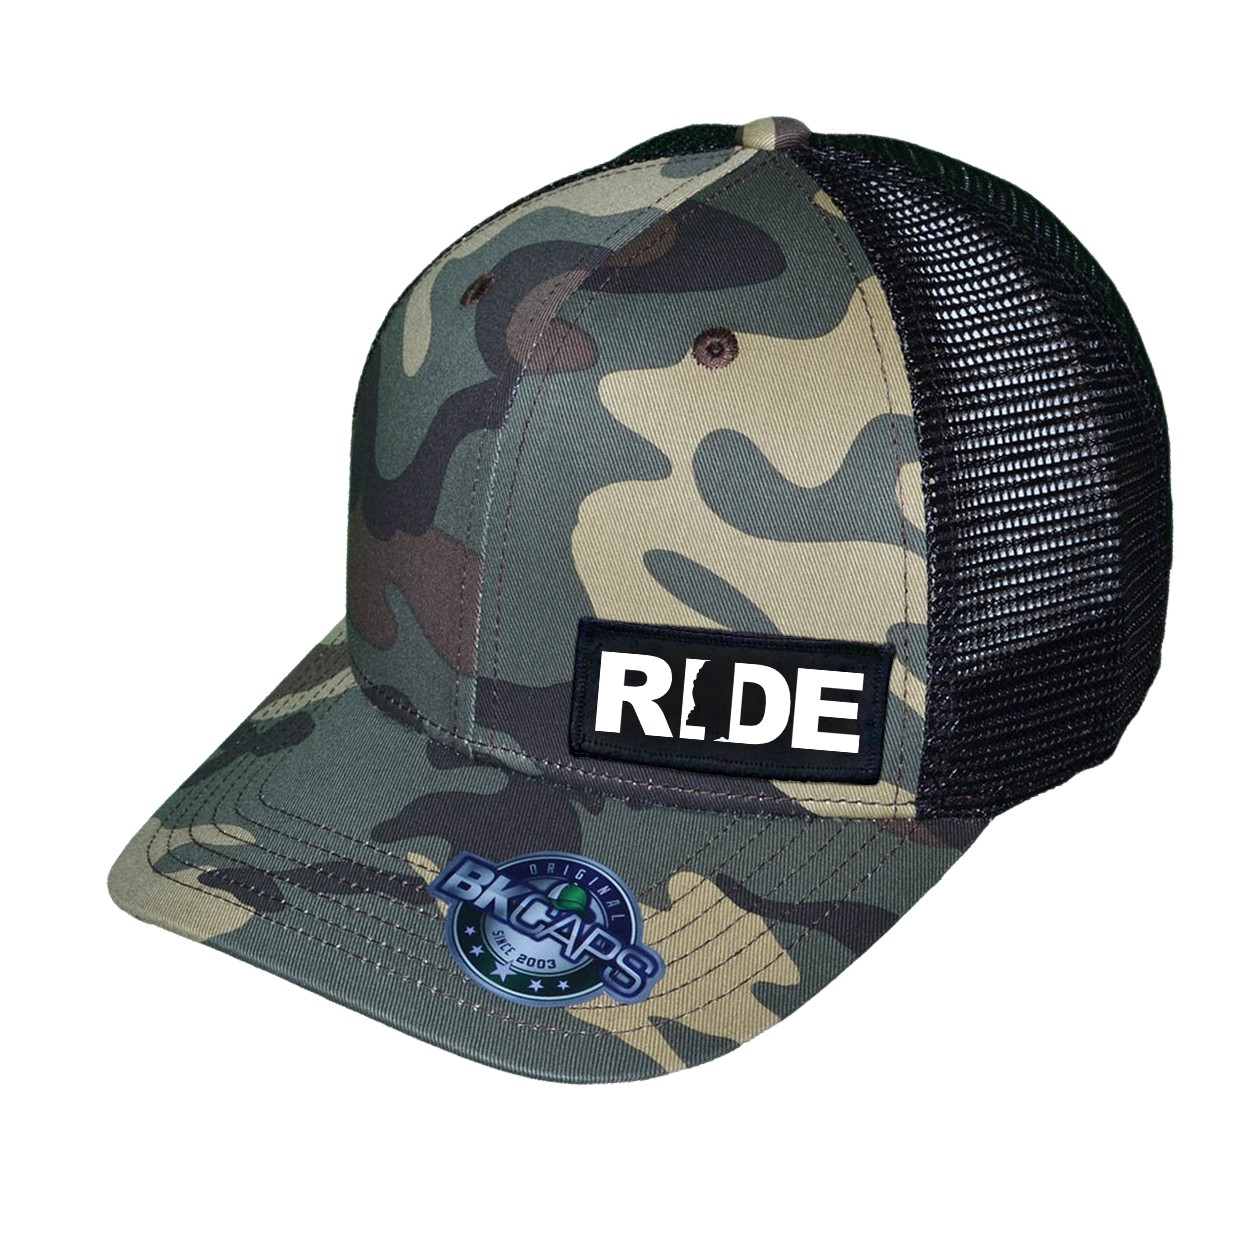 Ride Mississippi Night Out Woven Patch Mesh Snapback Trucker Hat Khaki/Camo (White Logo)